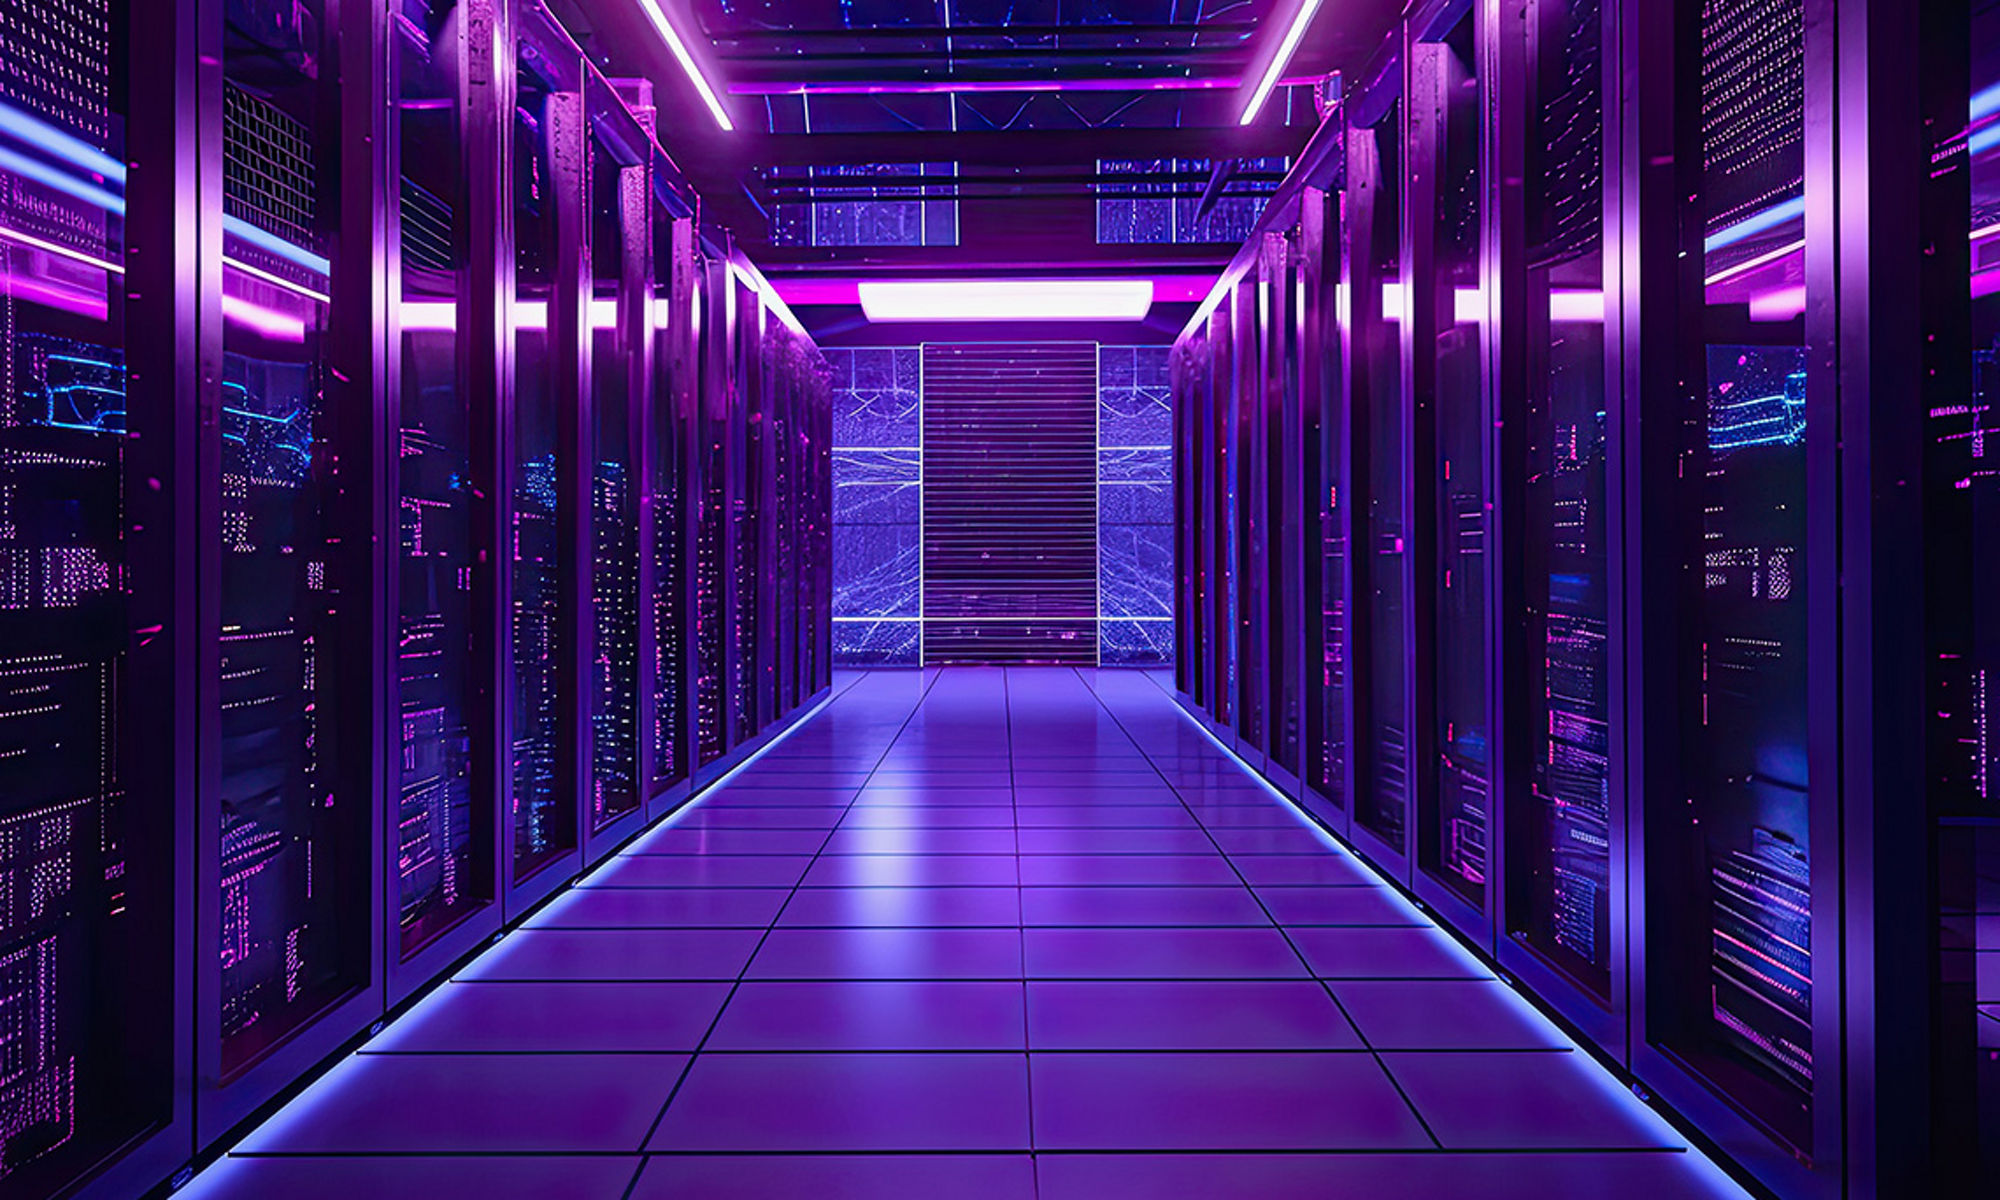 View looking between two rows of servers in a data center in blue and pink hues